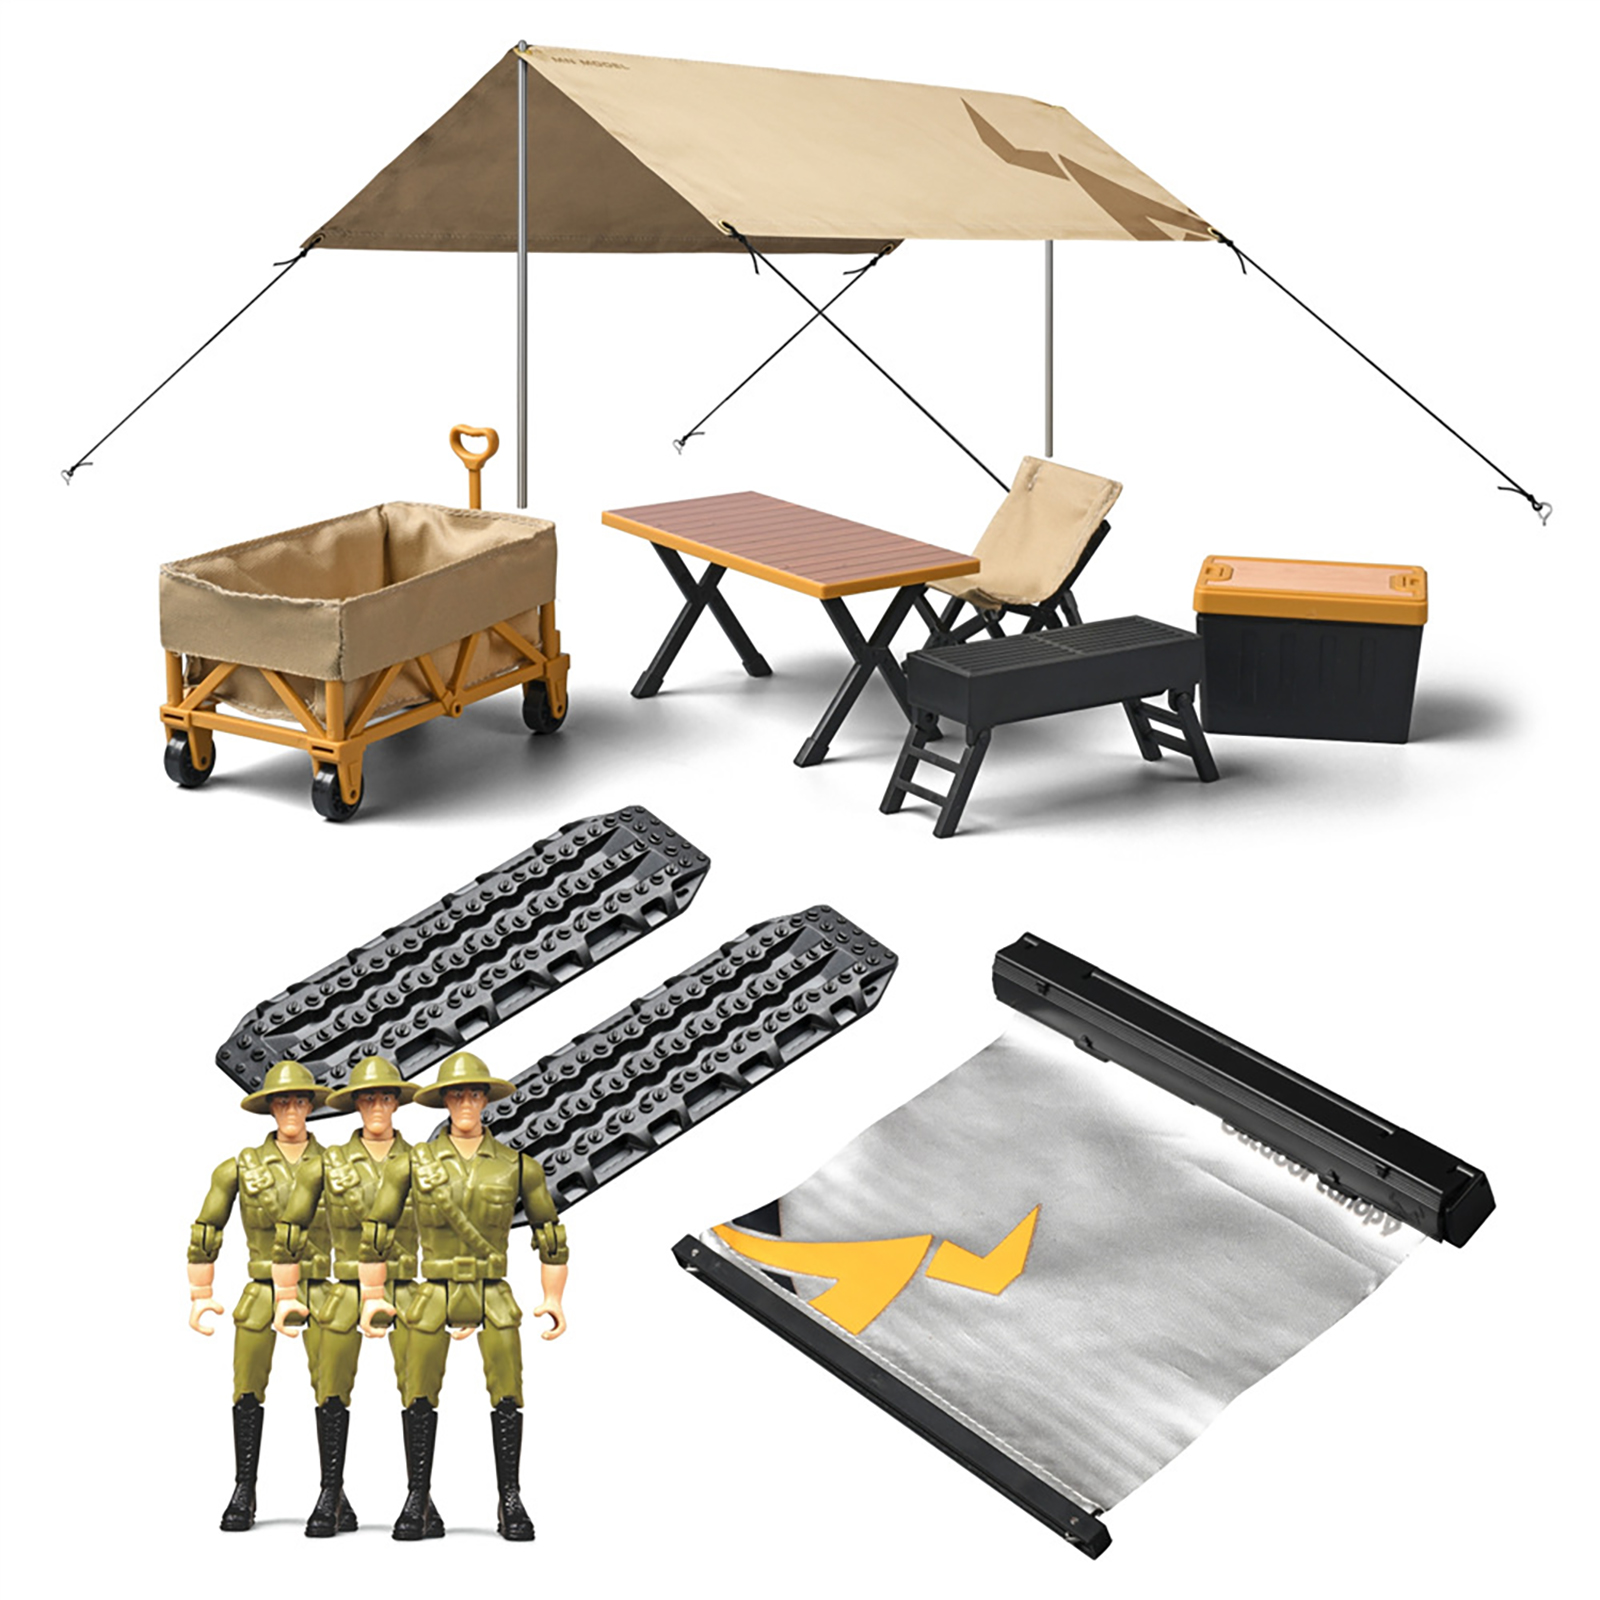 Mn-85k Simulation Camping Ornaments Side Awning Camping Tent for 1:12 RC Car Mn D90 Mn98 Mn99s Mn86